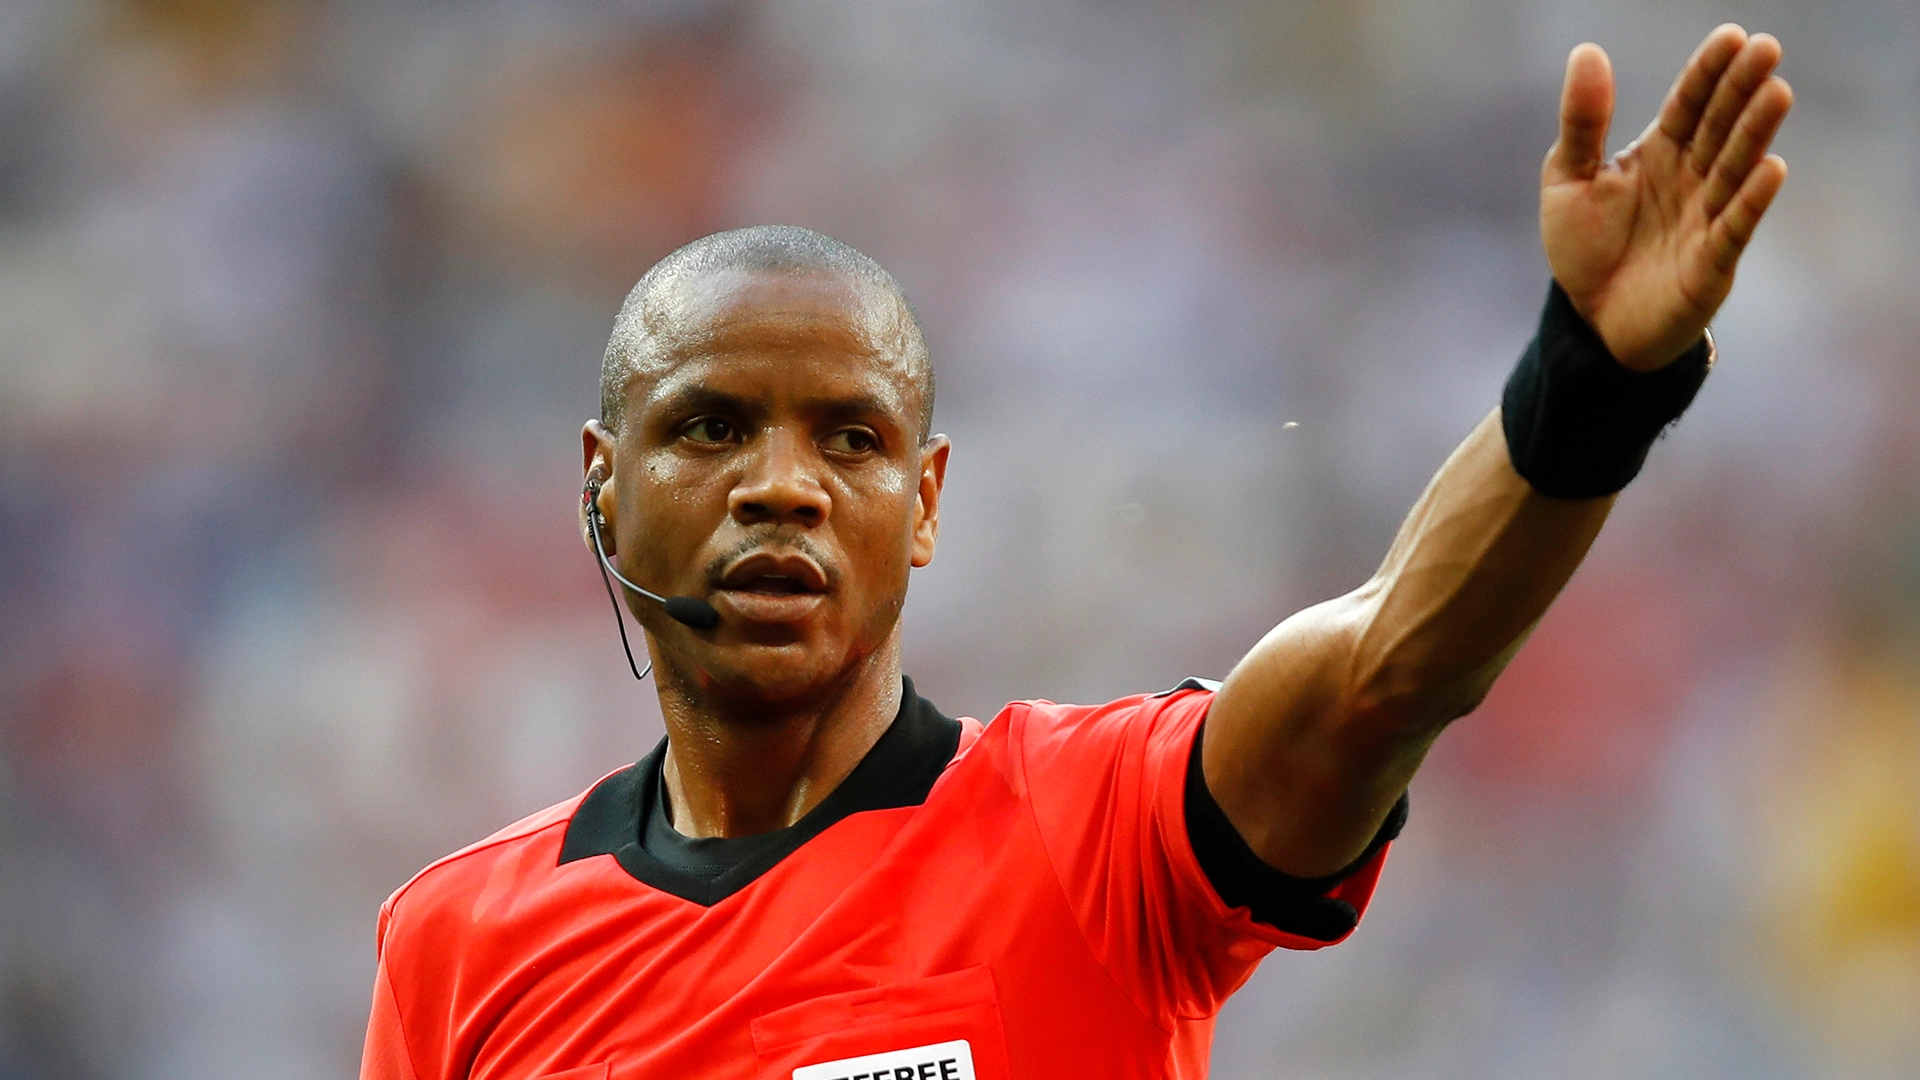 Janny Sikazwe To Officiate At FIFA World Cup